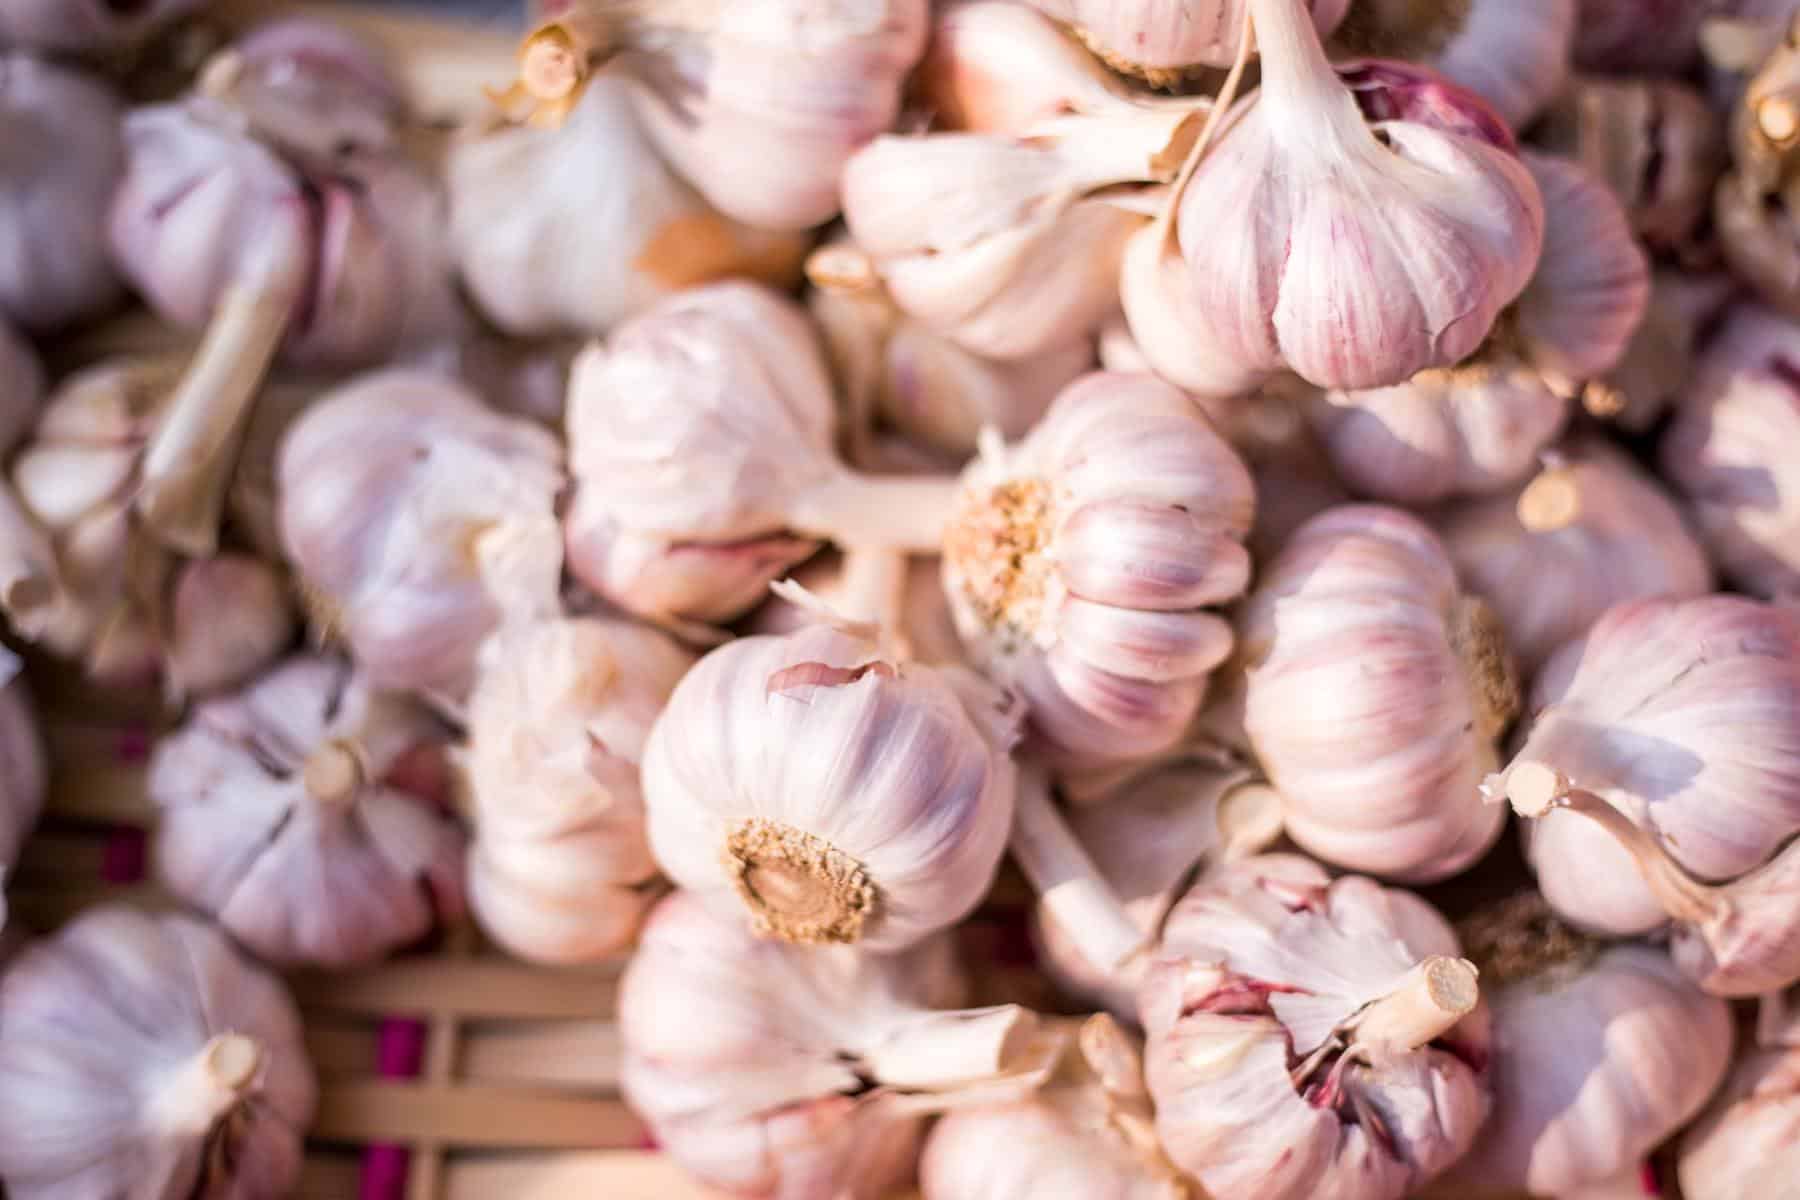 How Many Types of Garlic Are There